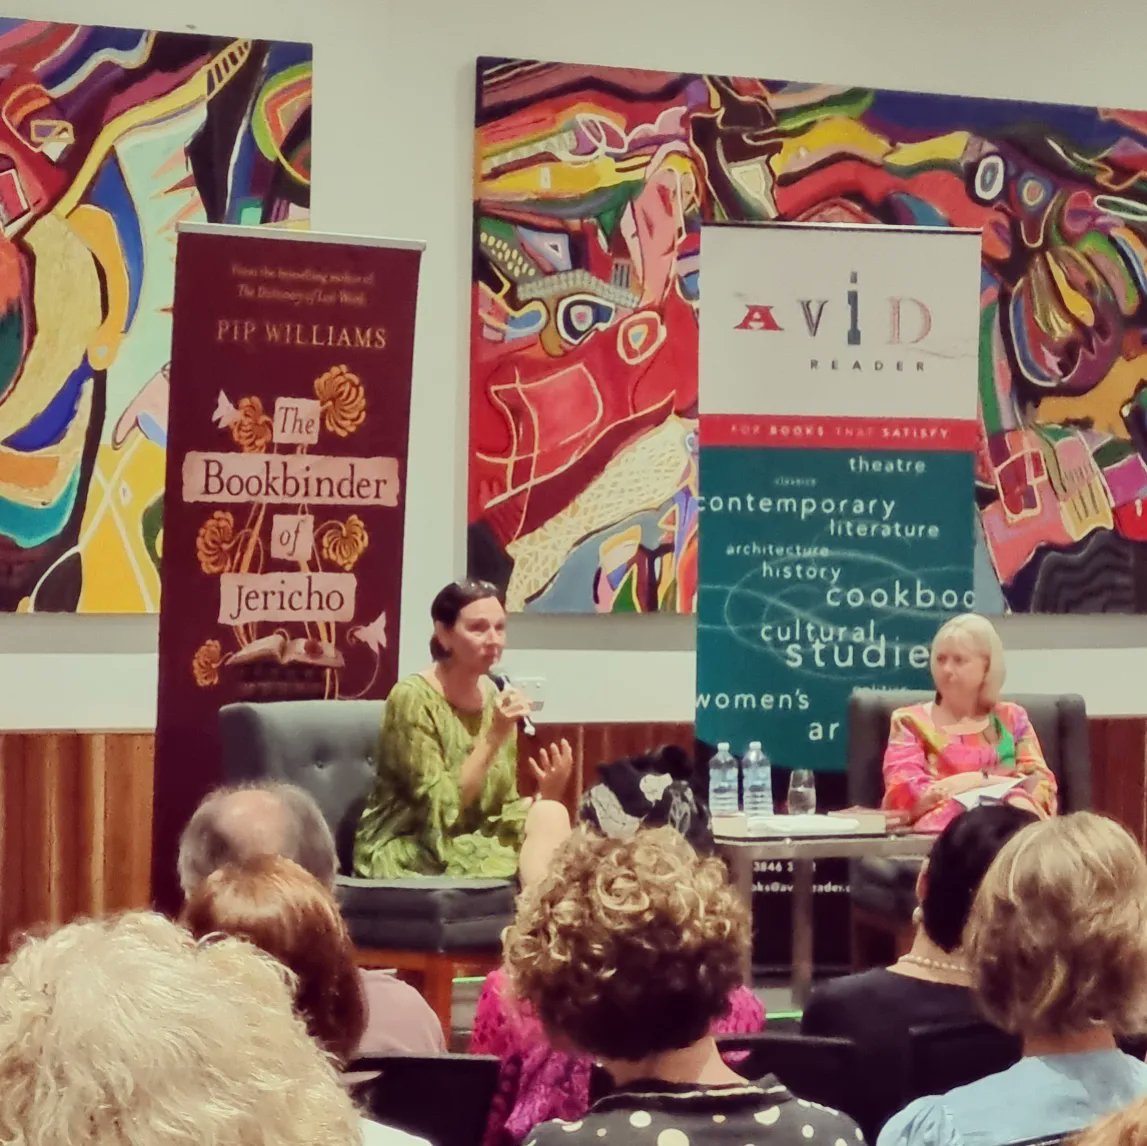 What a thrill hearing from #PipWilliams. I looooved #thedictionaryoflostwords. Like, Pip told us tonight,  I, too, had a soft spot for Tilda, who apparently makes a reappearance. Thanks, #AvidReader, for a great night. Easter wknd reading 📚 sorted. #thebookbinderofjericho